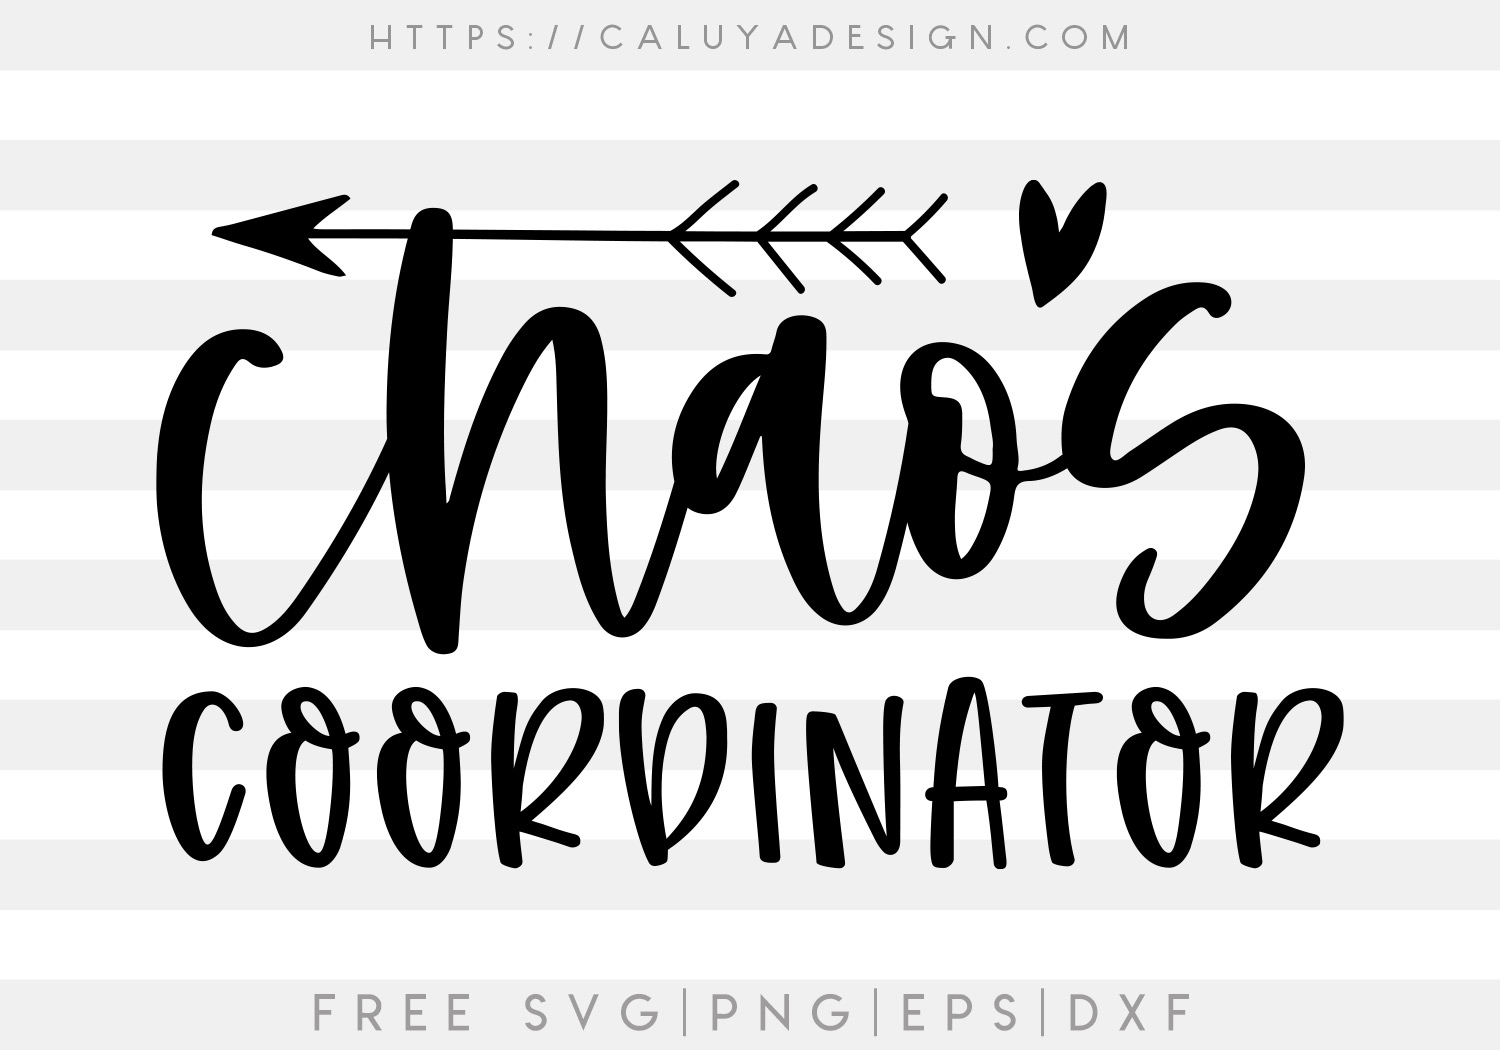 Chaos Coordinator SVG, PNG, EPS & DXF